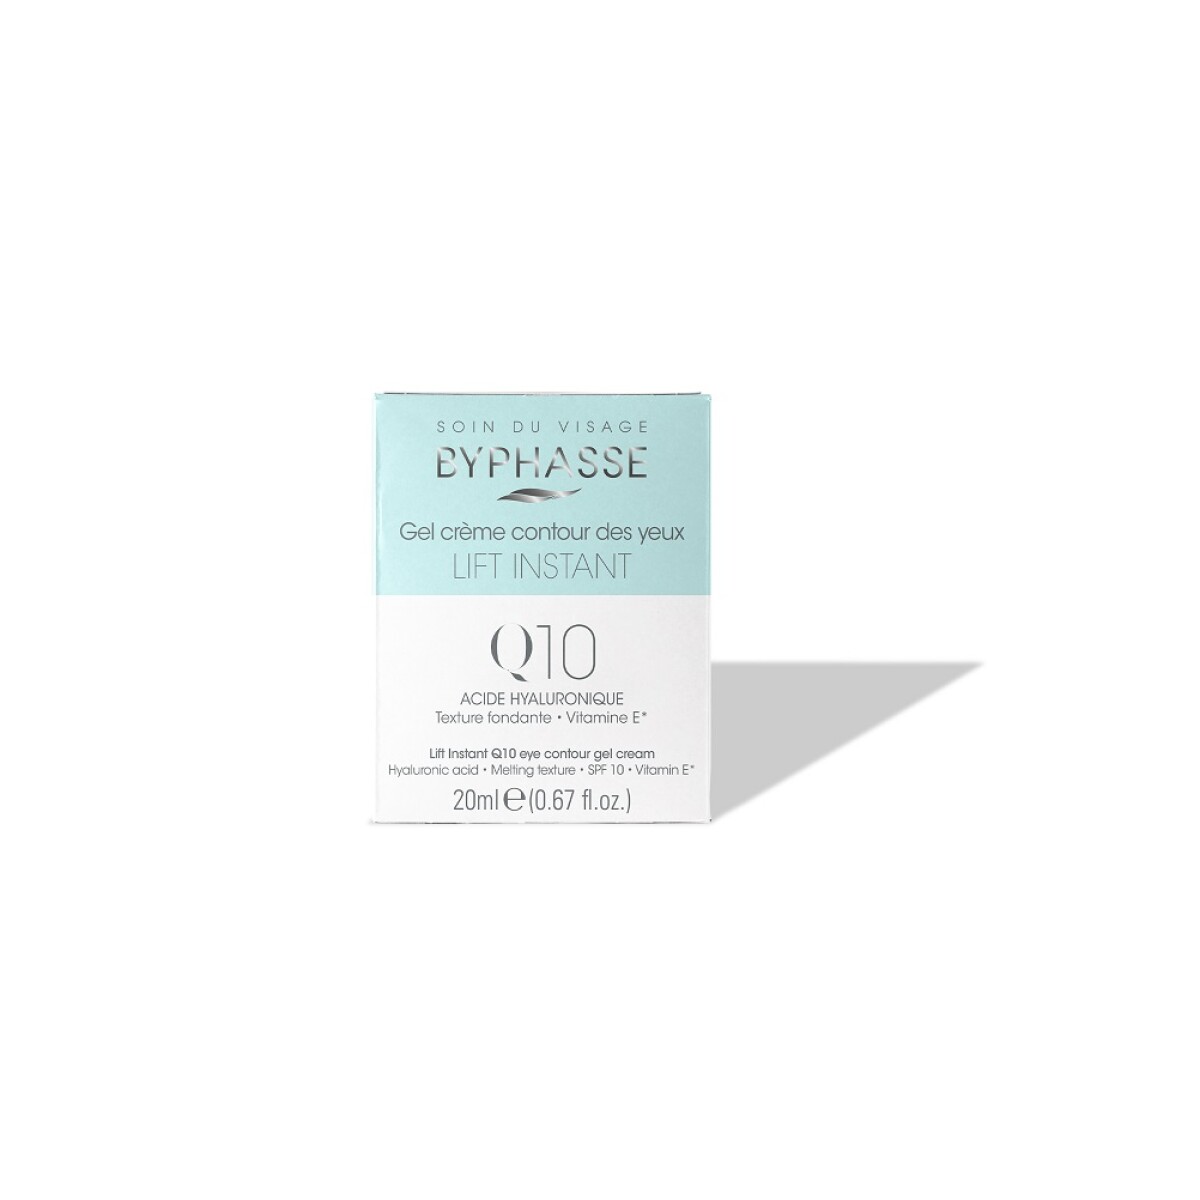 Contorno De Ojos Lift Instant Q10 Byphasse 20ml. 